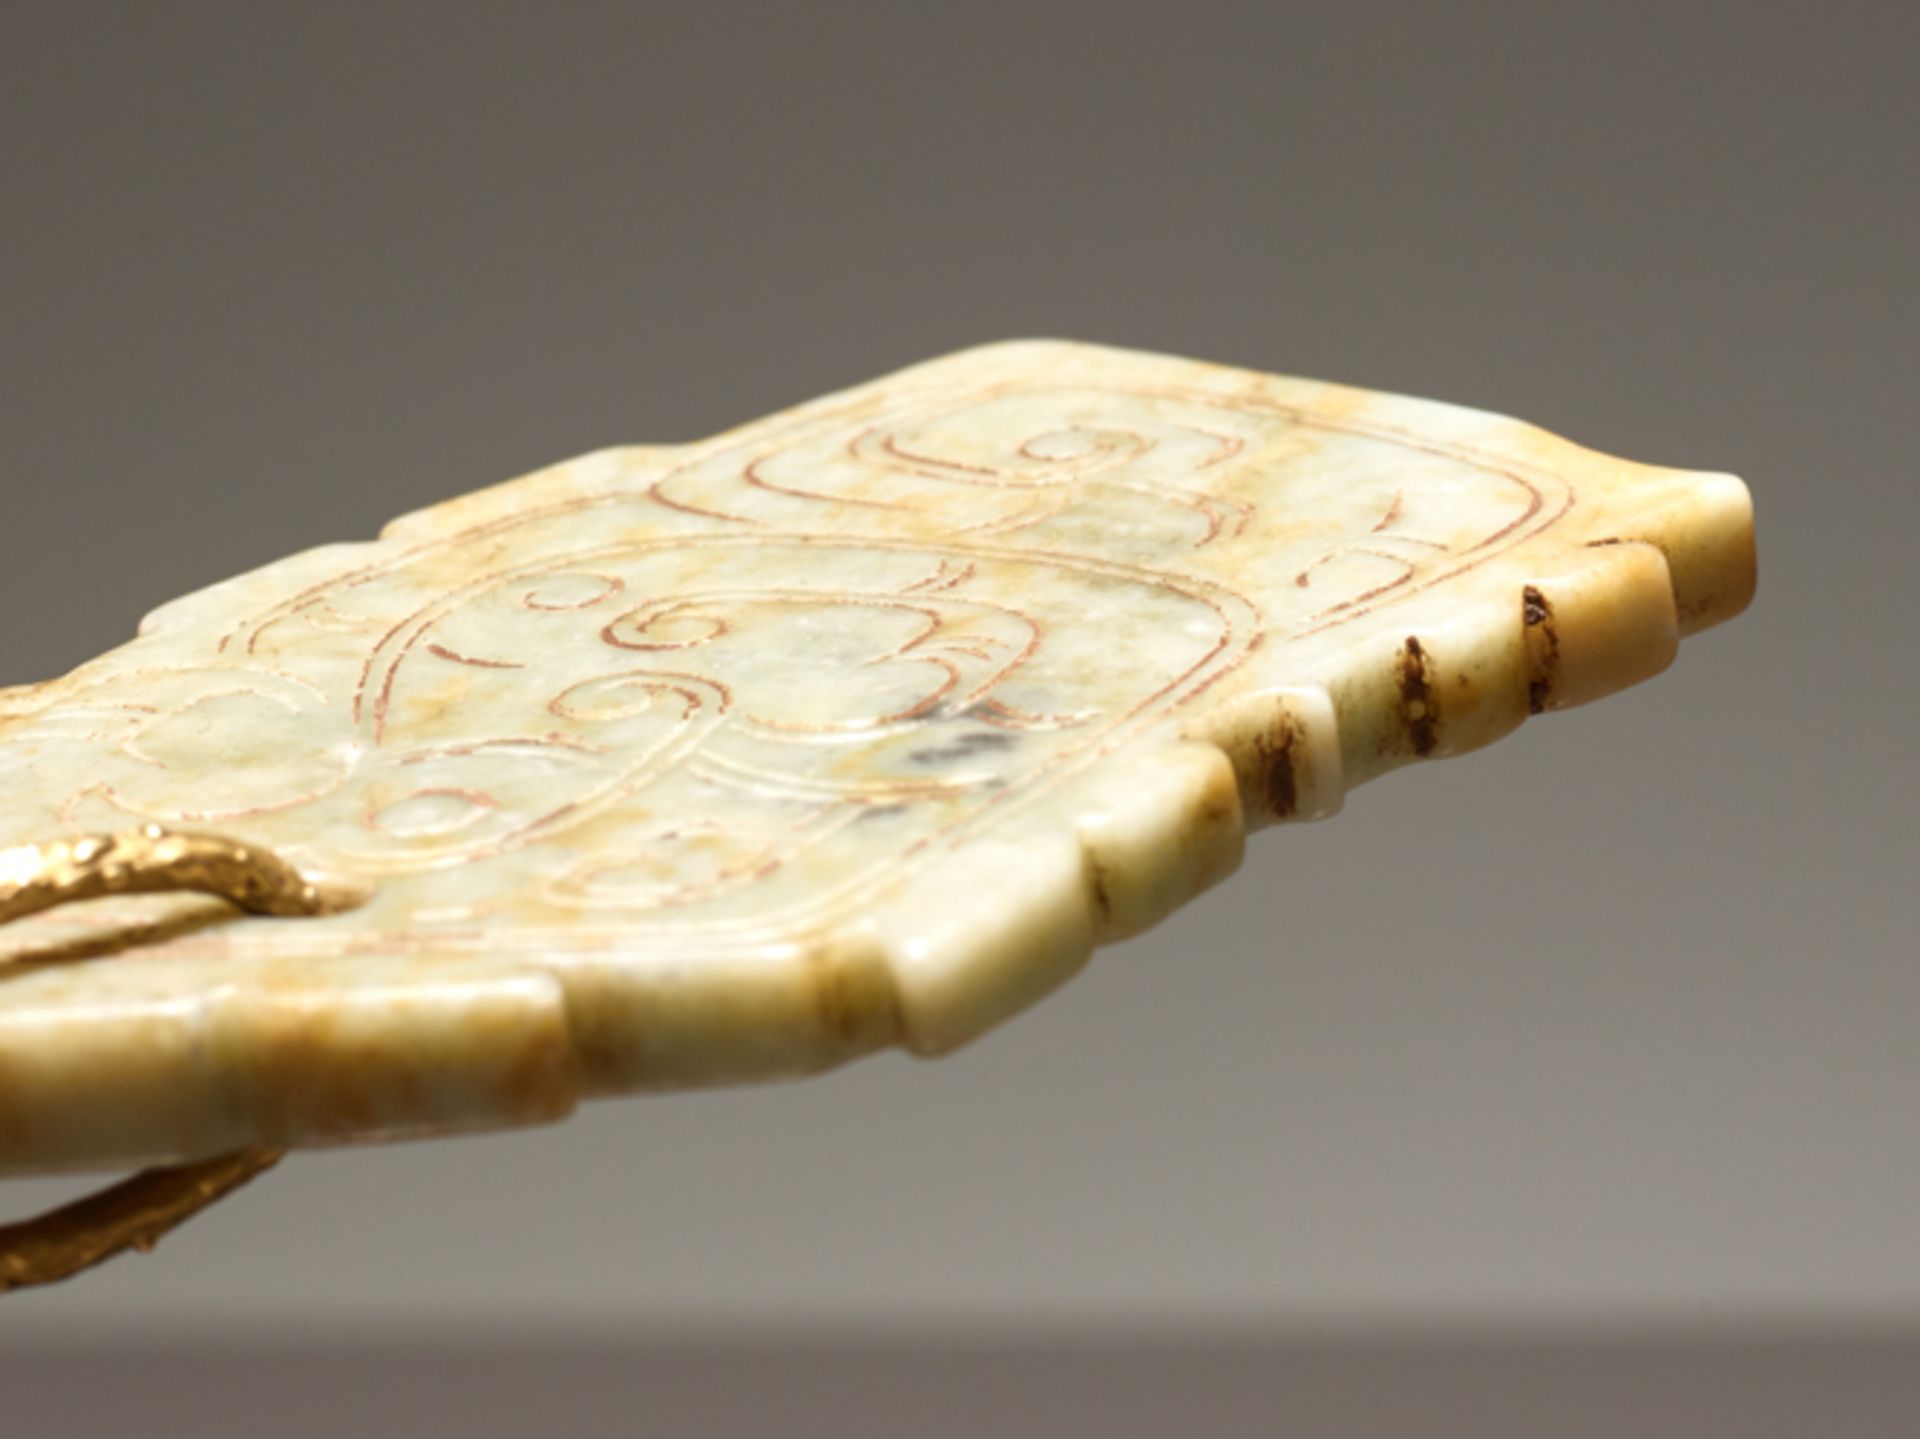 JADE PLAQUE DECORATED WITH A BIRDJade. China, Middle to late Western Zhou period, 10th-9th century - Image 4 of 4